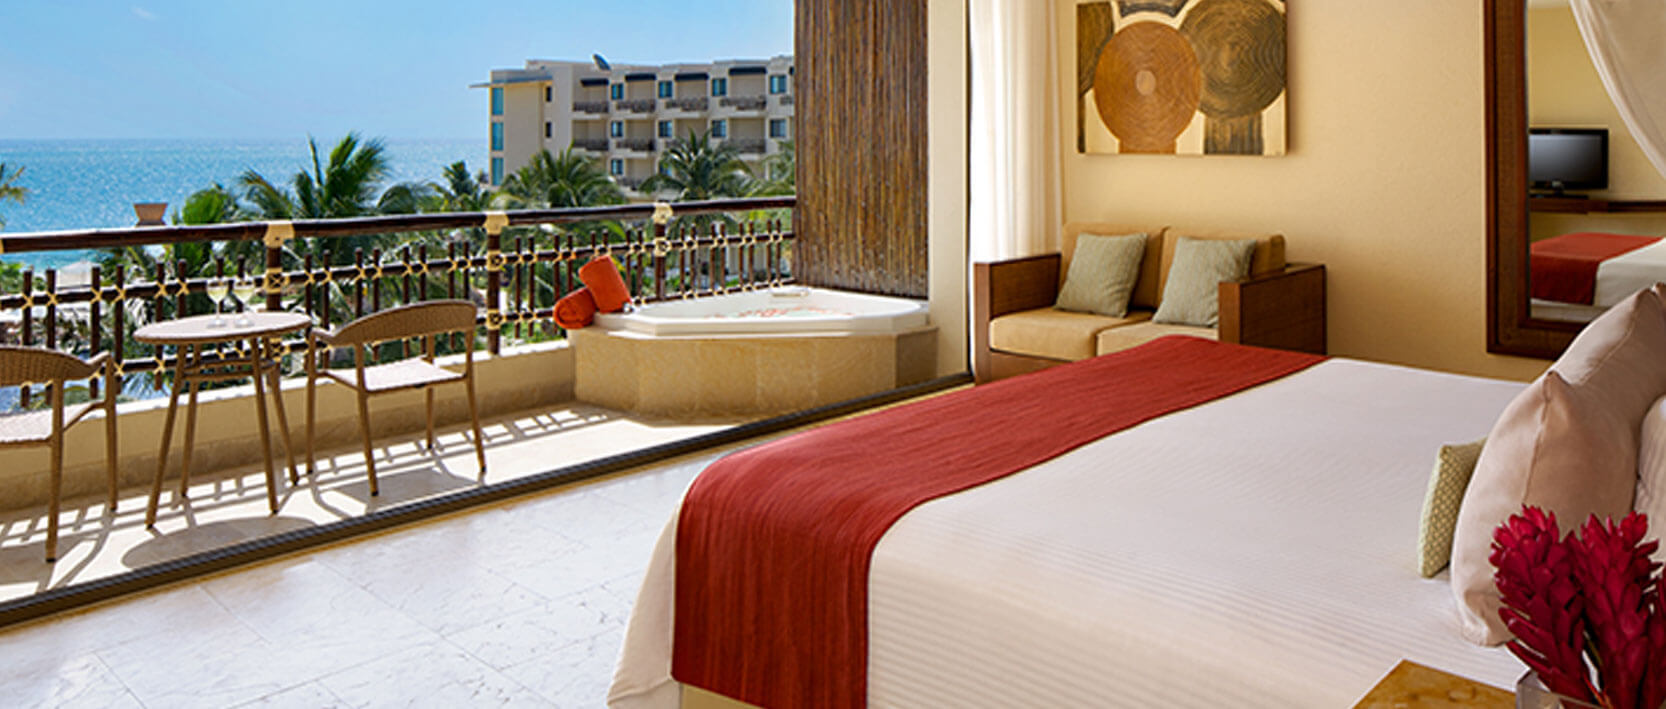 Dreams Riviera Cancun Resort Accommodations - Preferred Club Ocean View and Pool Front